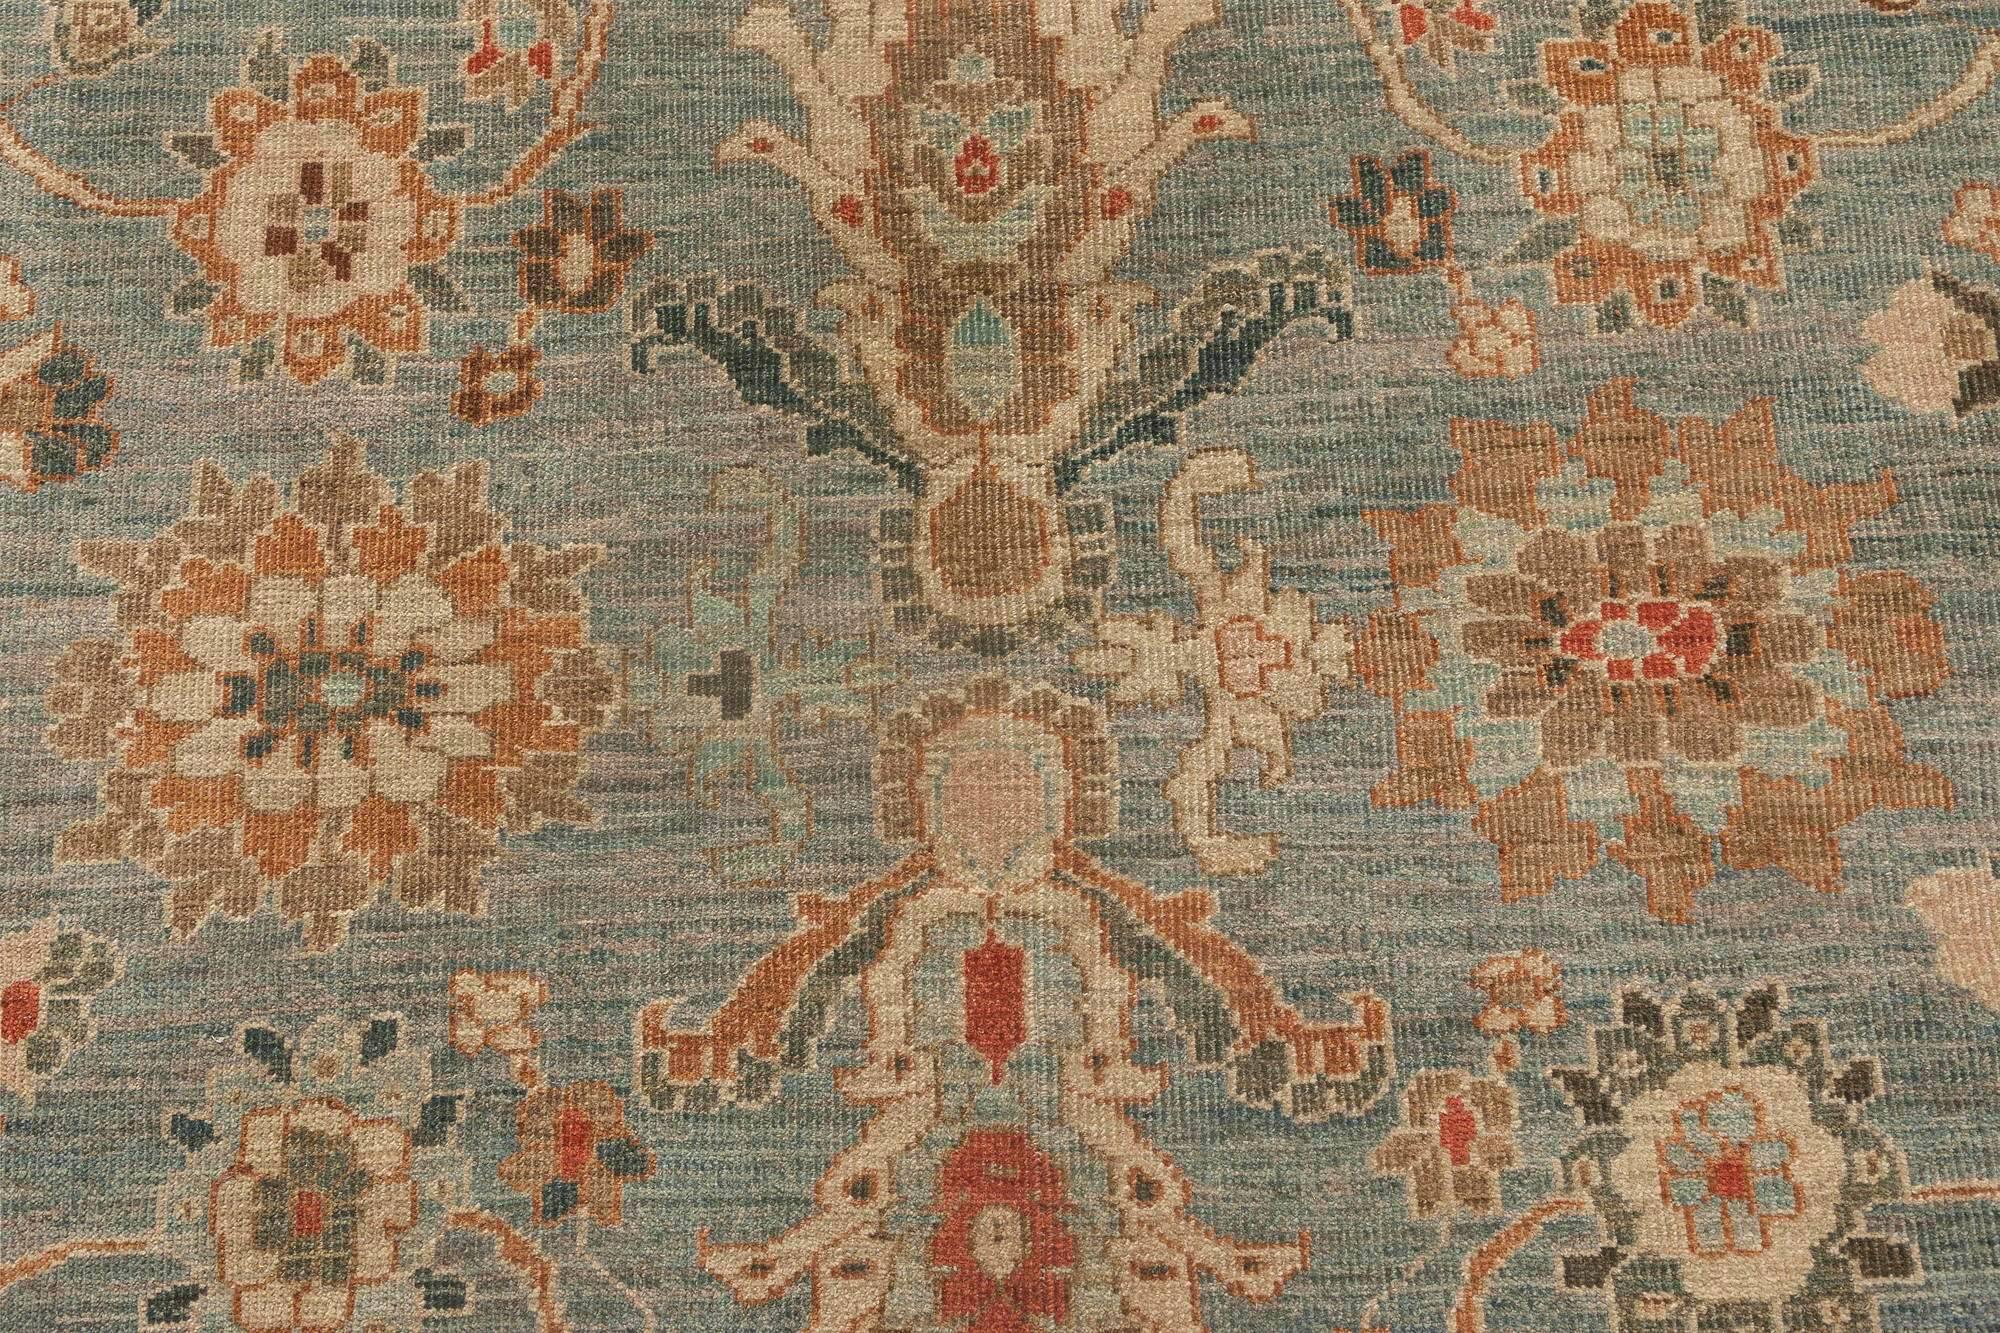 Blue Traditional Sultanabad design rug
Size: 11'9